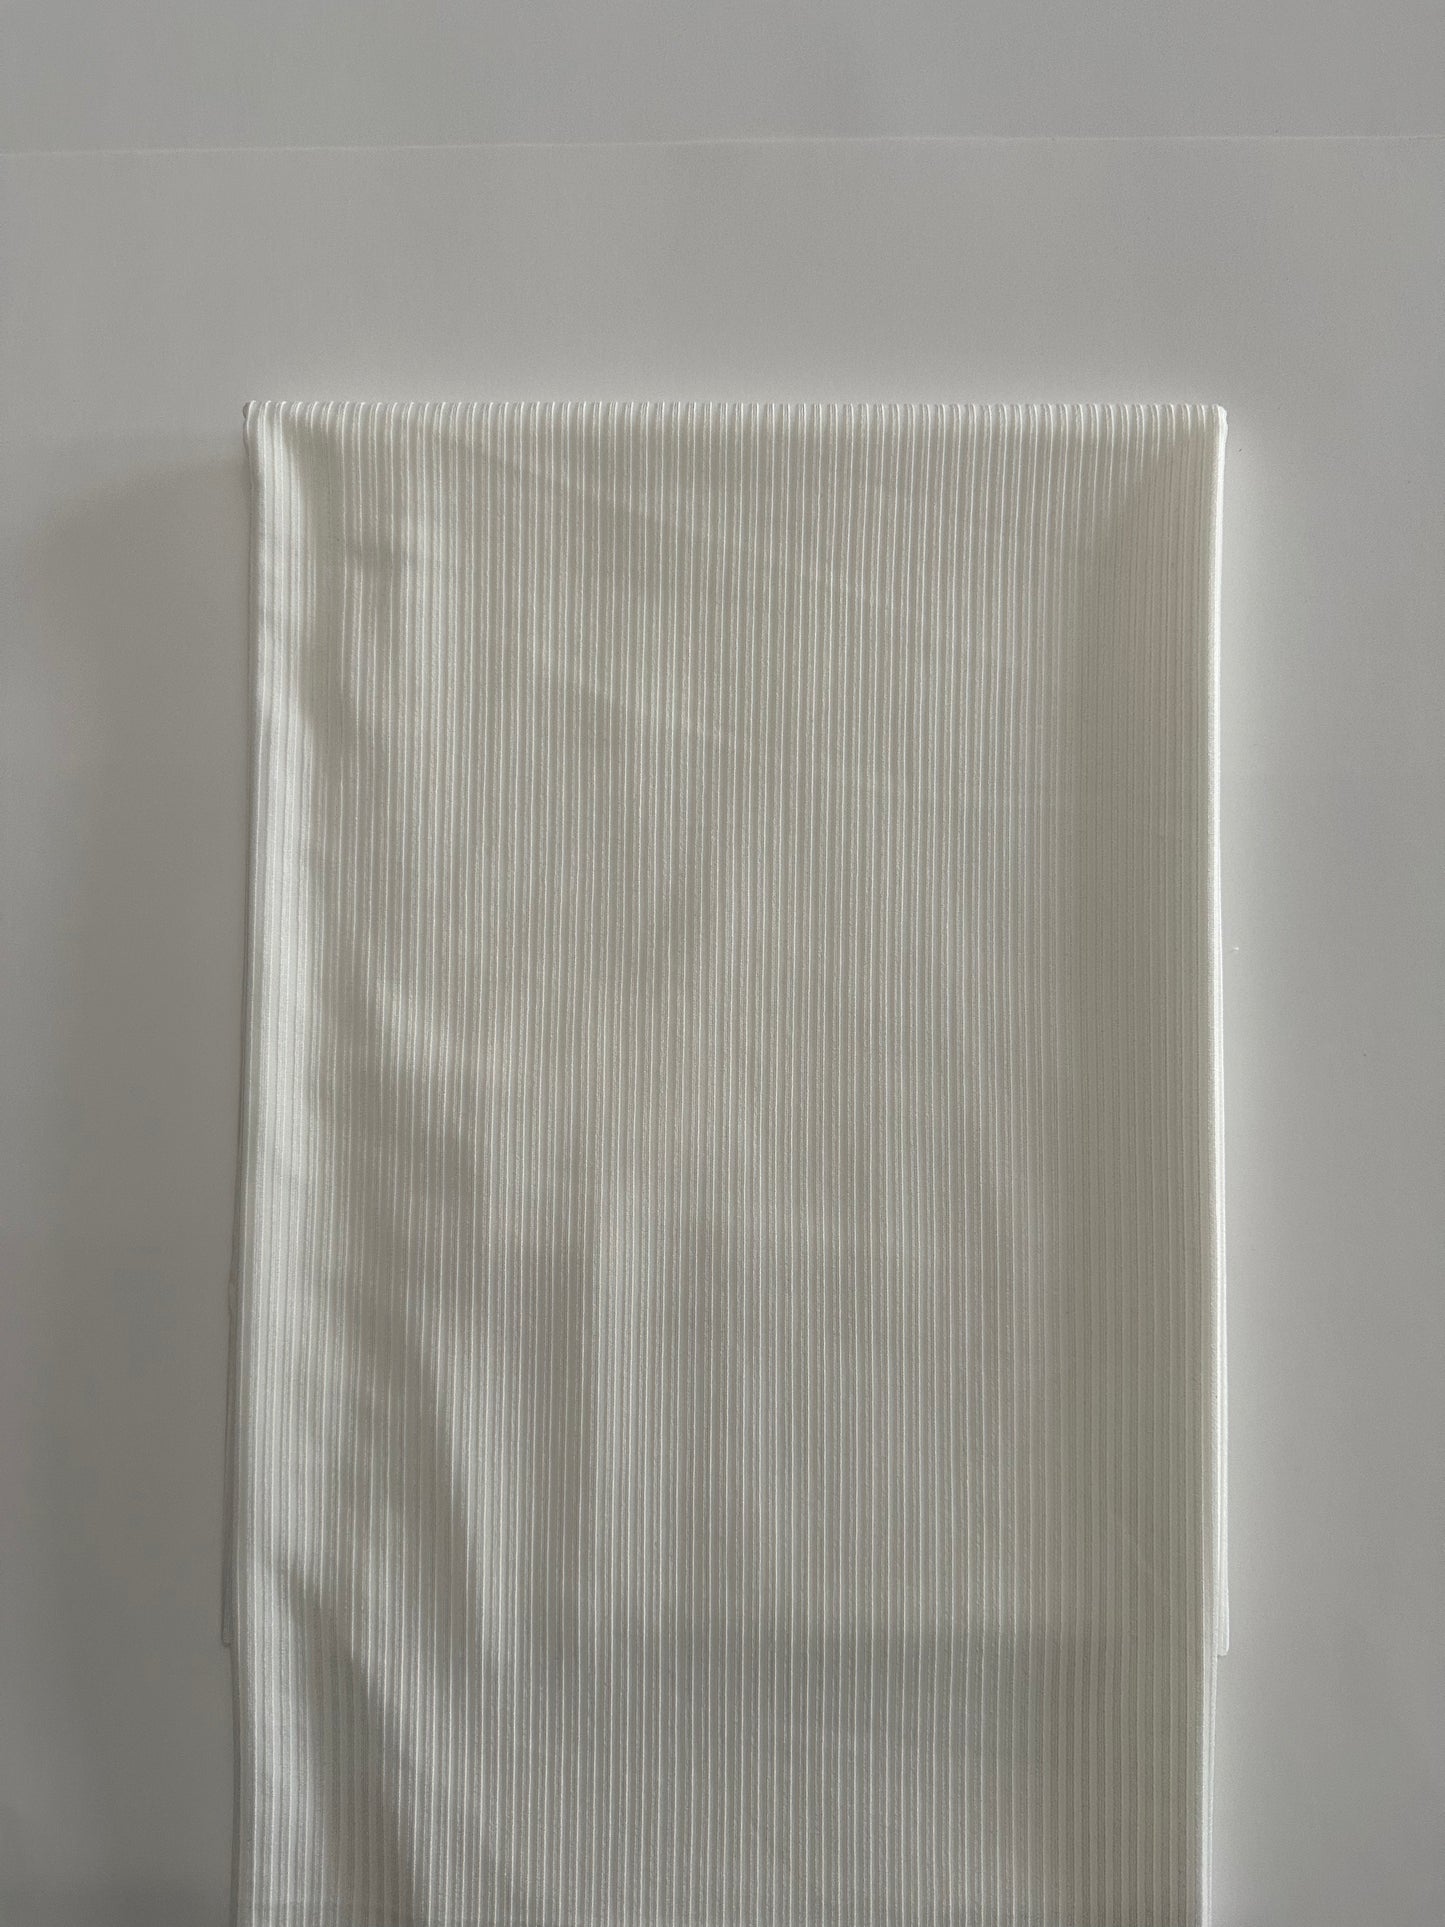 Solid in White (new) on Unbrushed Rib Knit Fabric Sold by the 1/4 yard